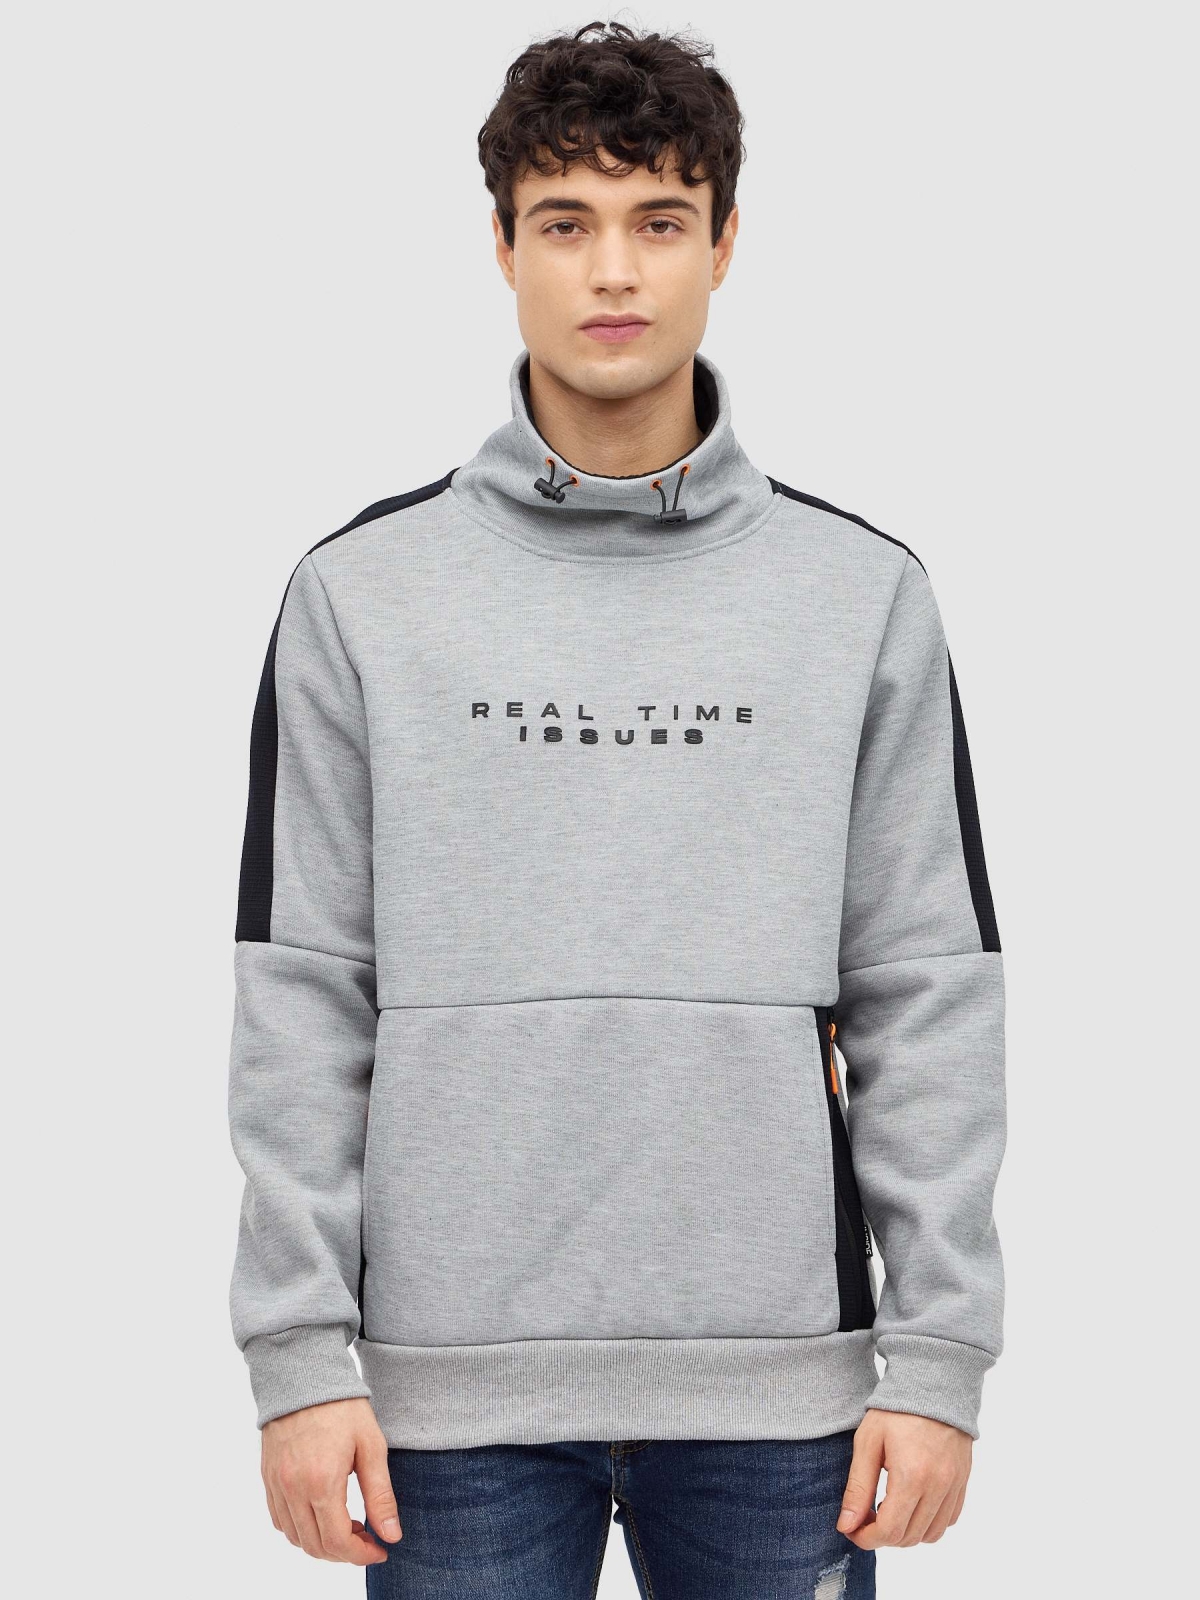 Real Time fluid neck sweatshirt grey middle front view